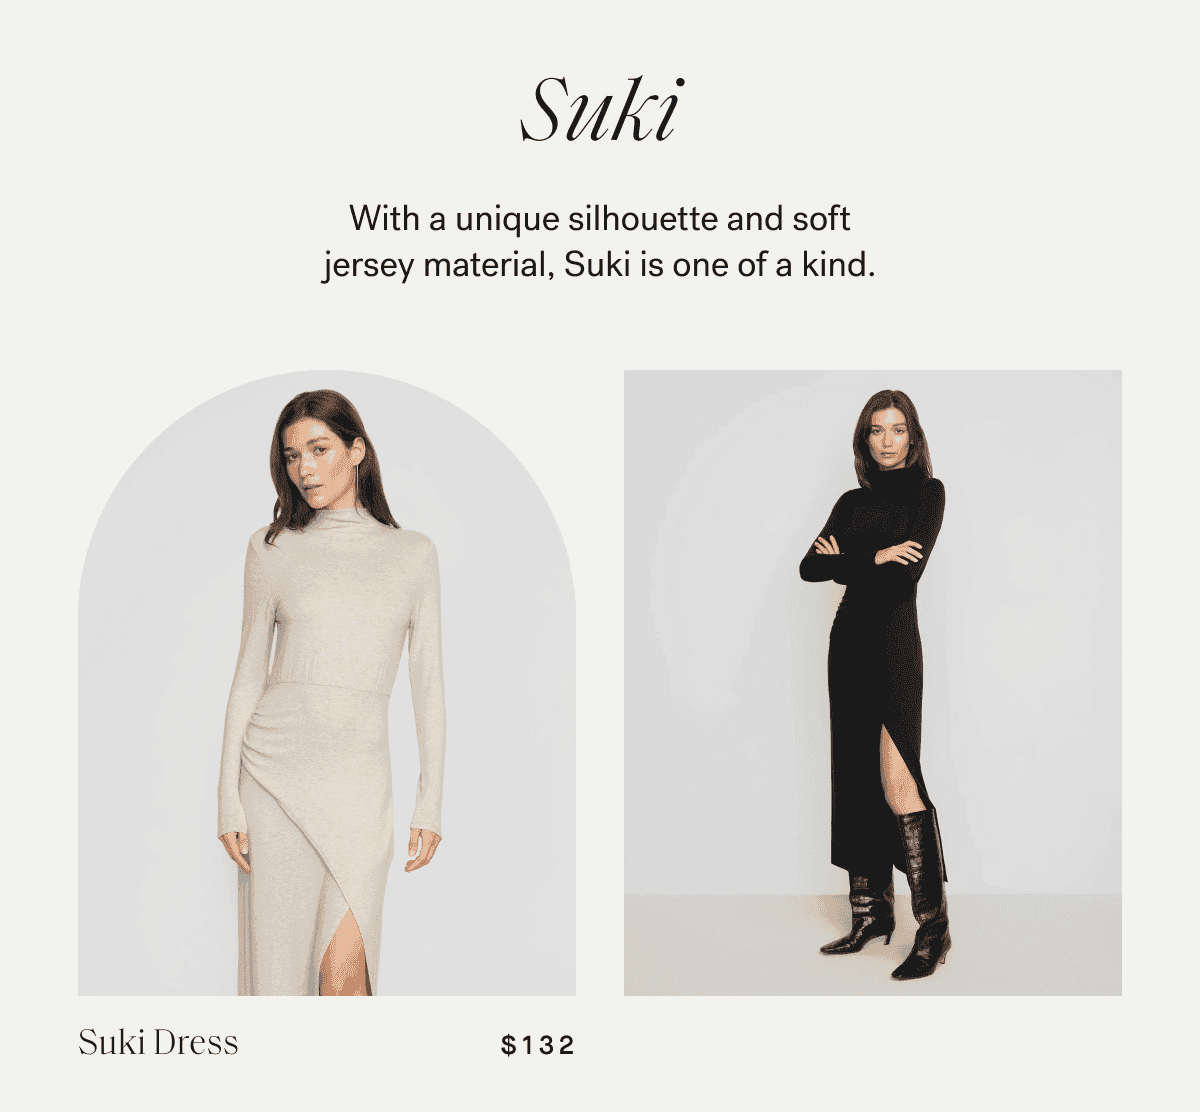 Suki —\xa0With a unique silhouette and soft jersey material, Suki is one of a kind.